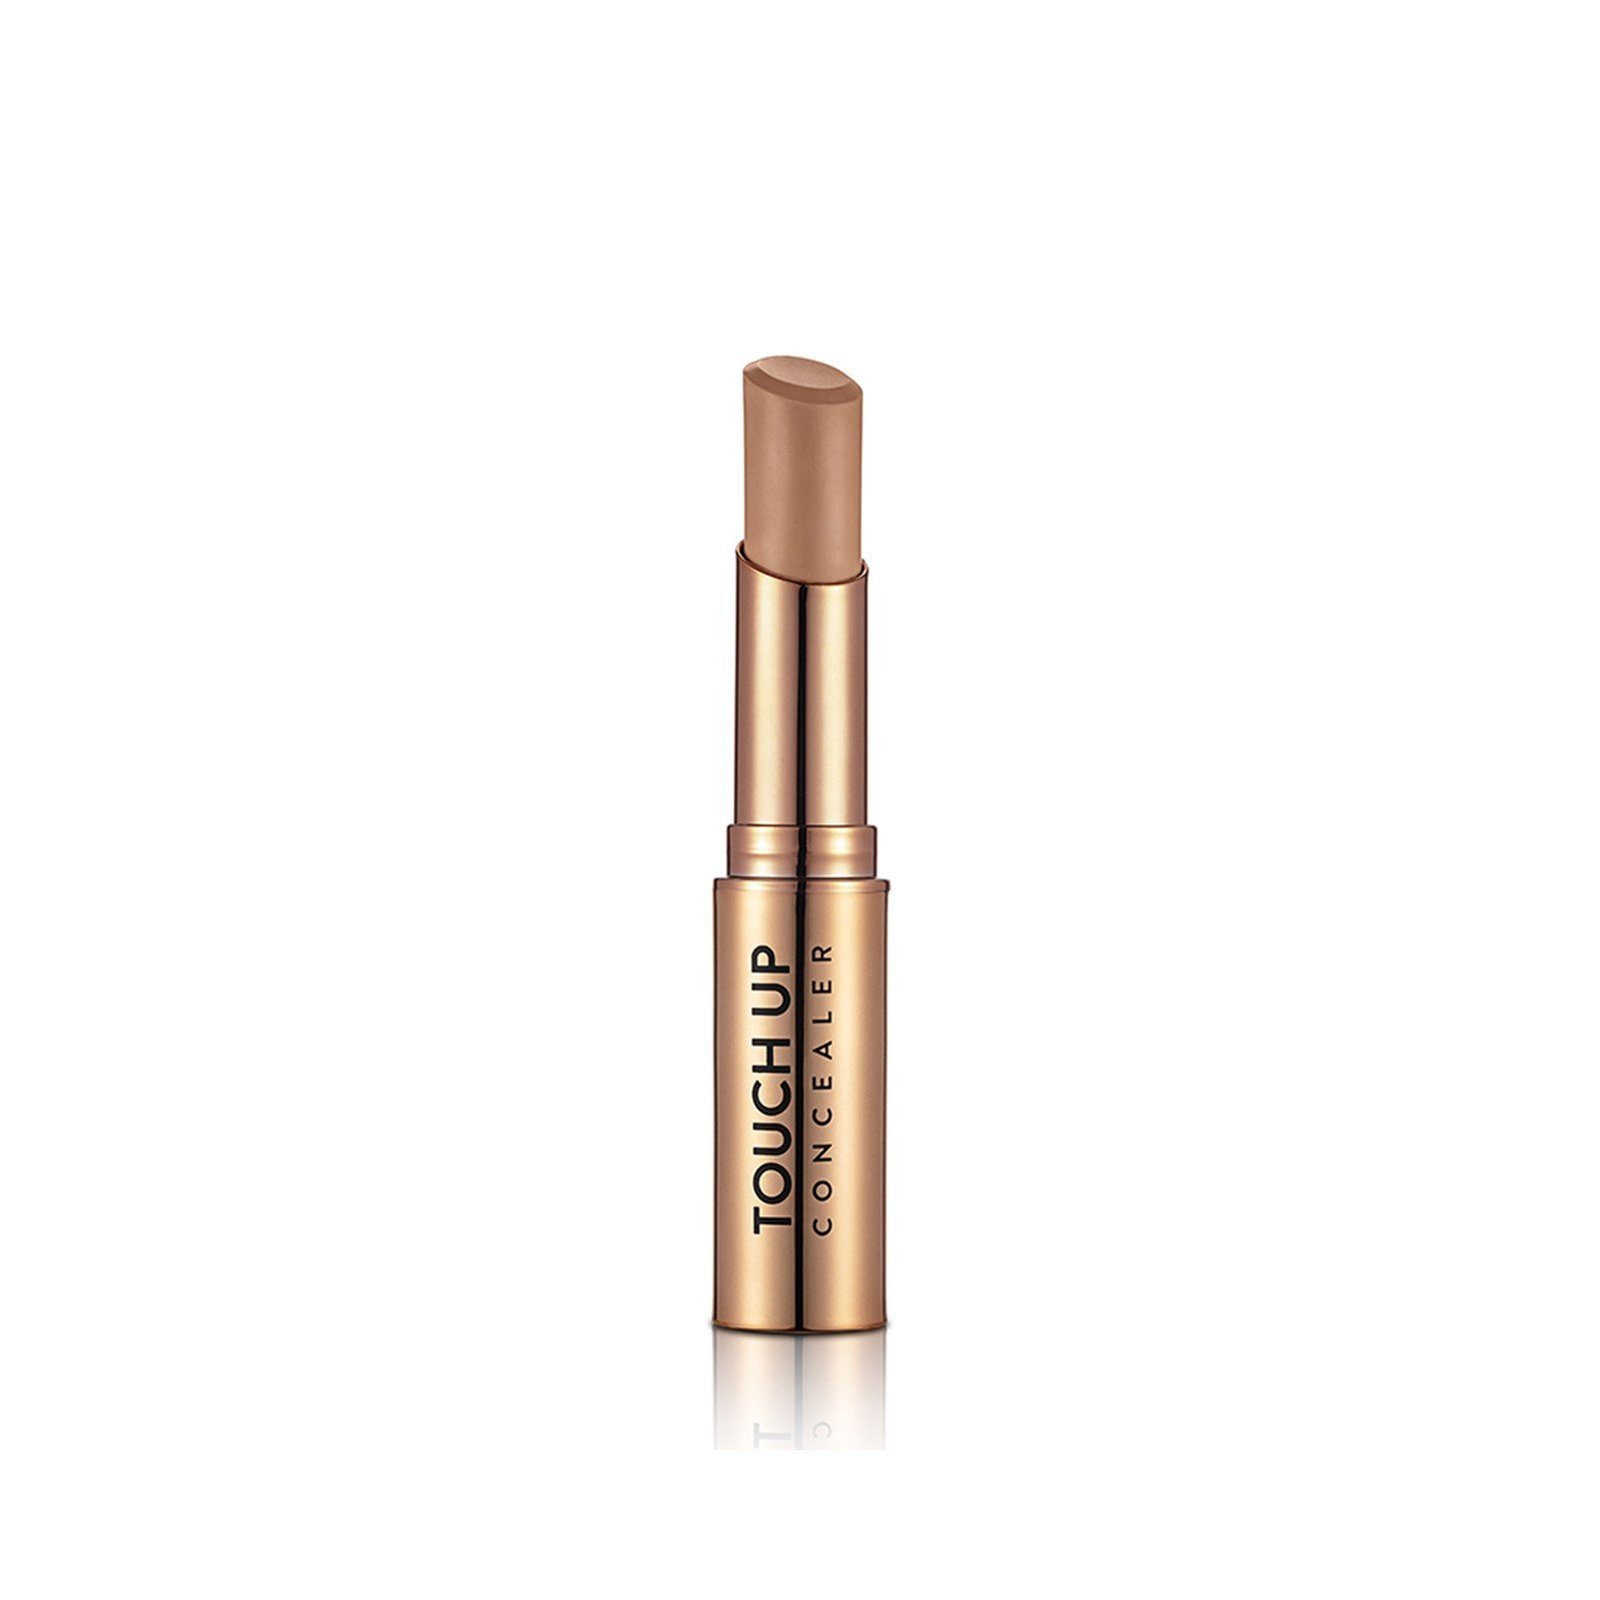 Flormar Touch Up Concealer 20 Ivory 3.5g